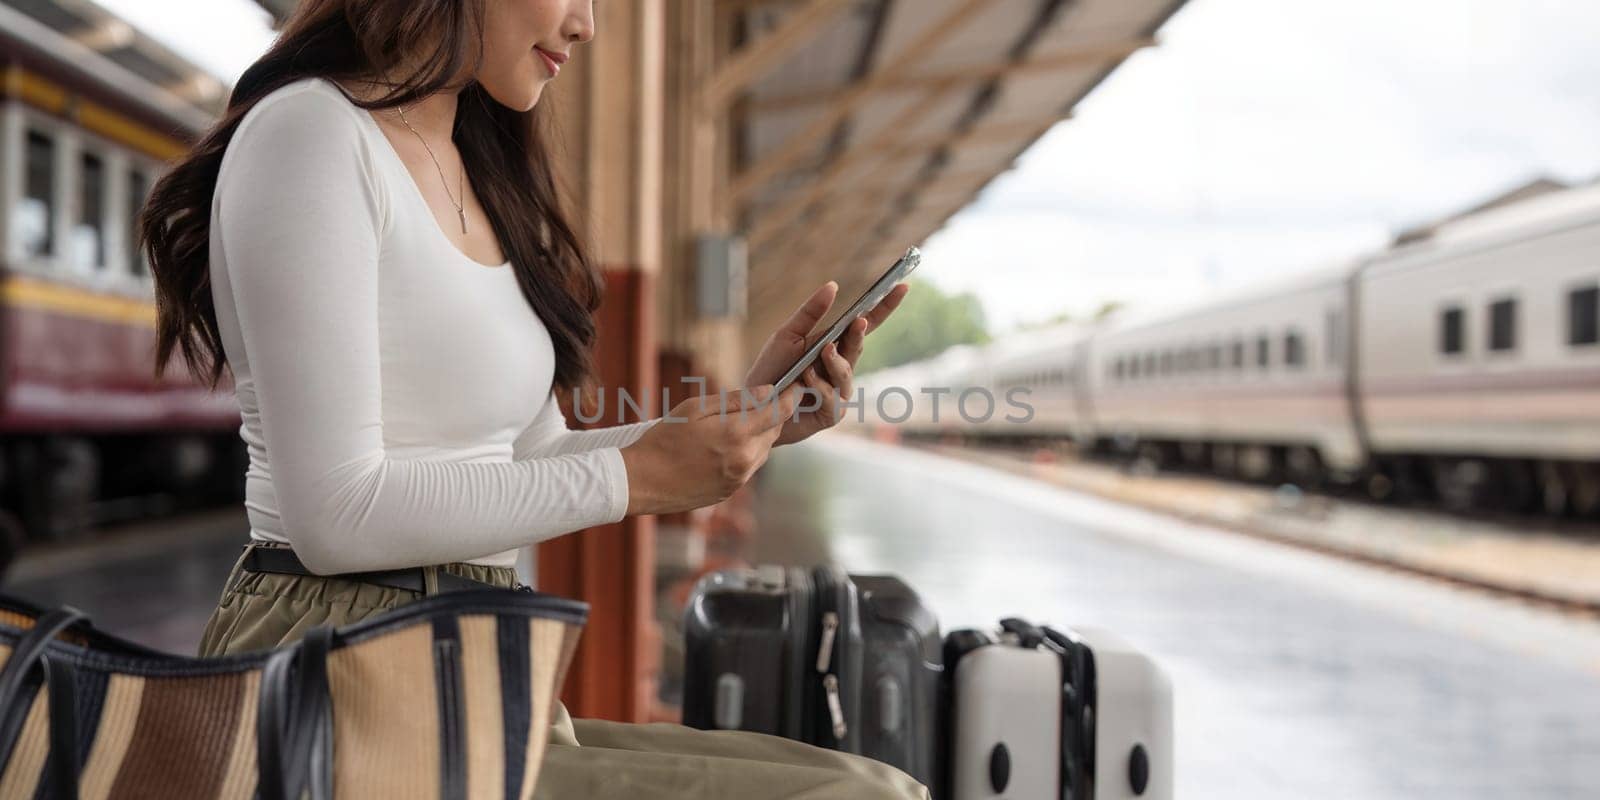 Asian female traveler using her smart phone mobile while waiting for a train at a station.